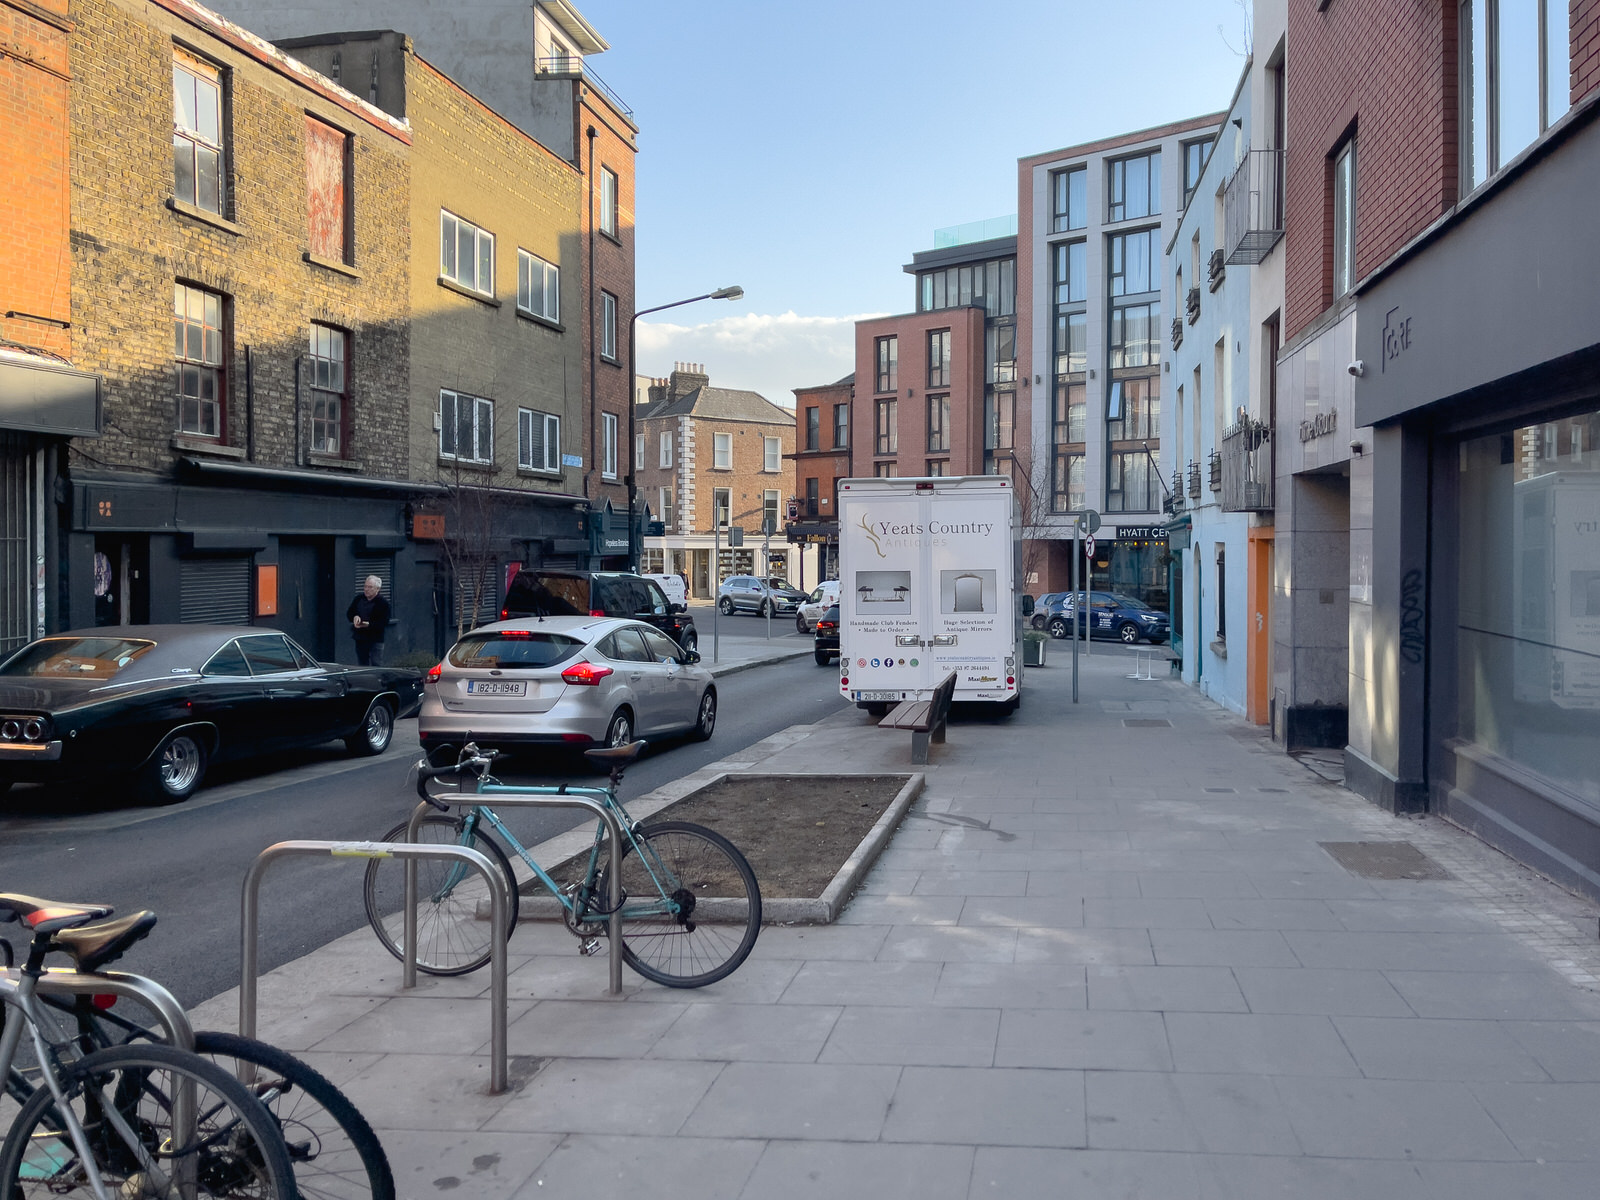 FRANCIS STREET IN FEBRUARY 2023 - NO BICYCLE LANE